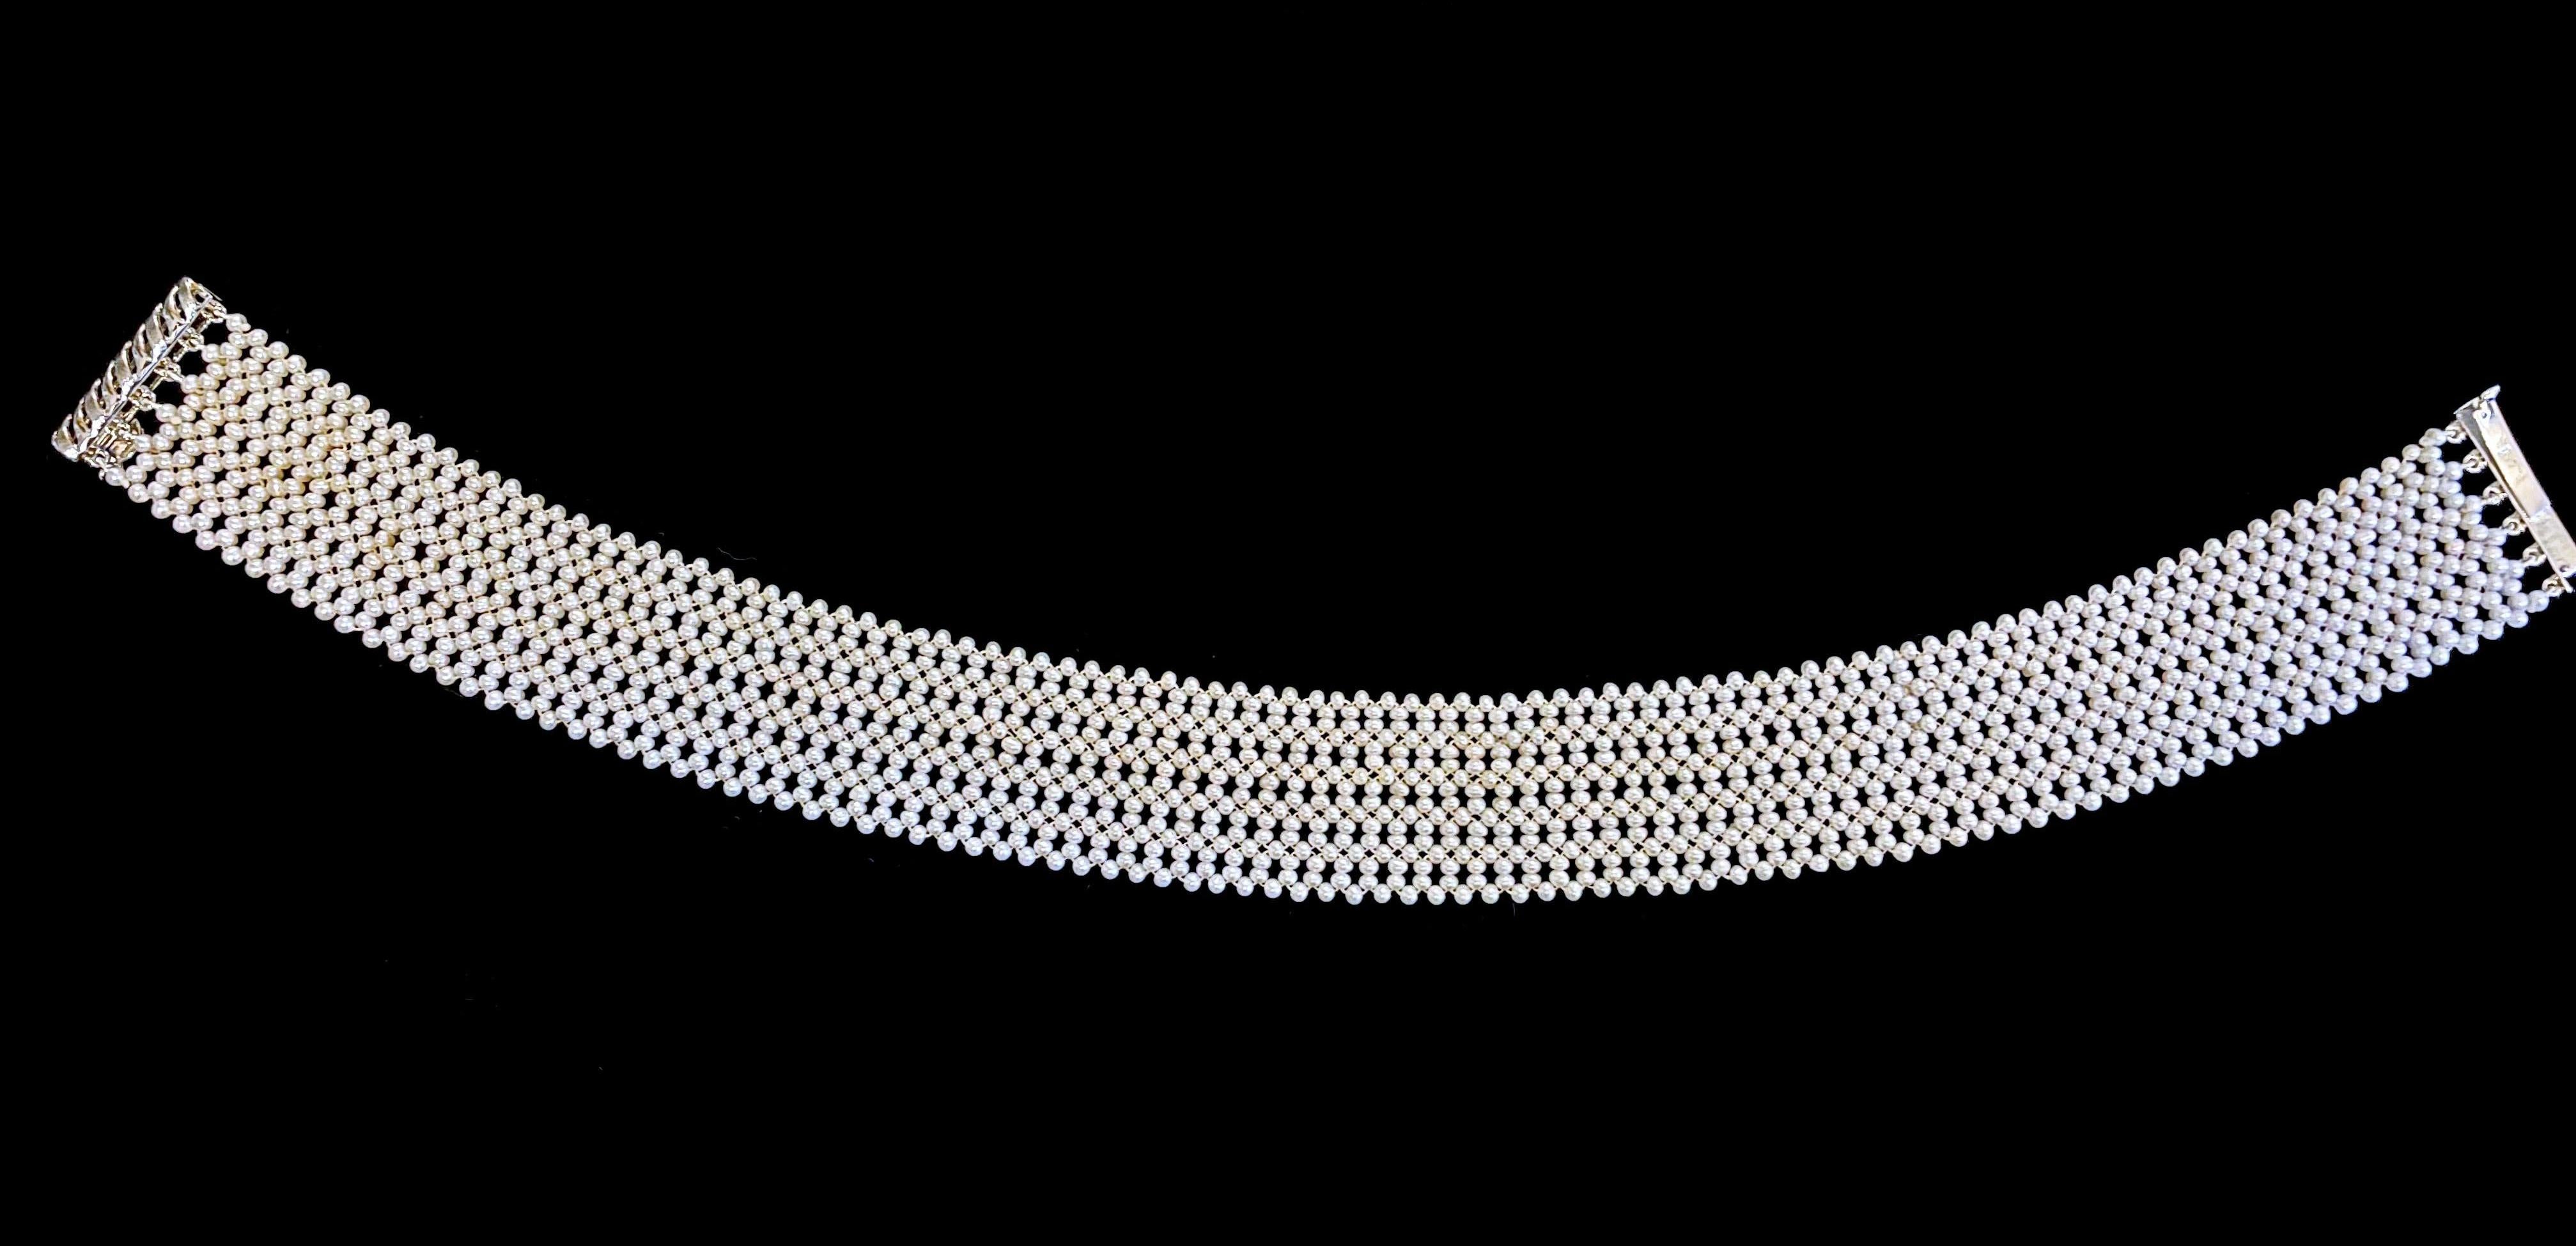 Marina J. Lace Woven Pearl Choker with Rhodium Plated Silver Clasp For Sale 5